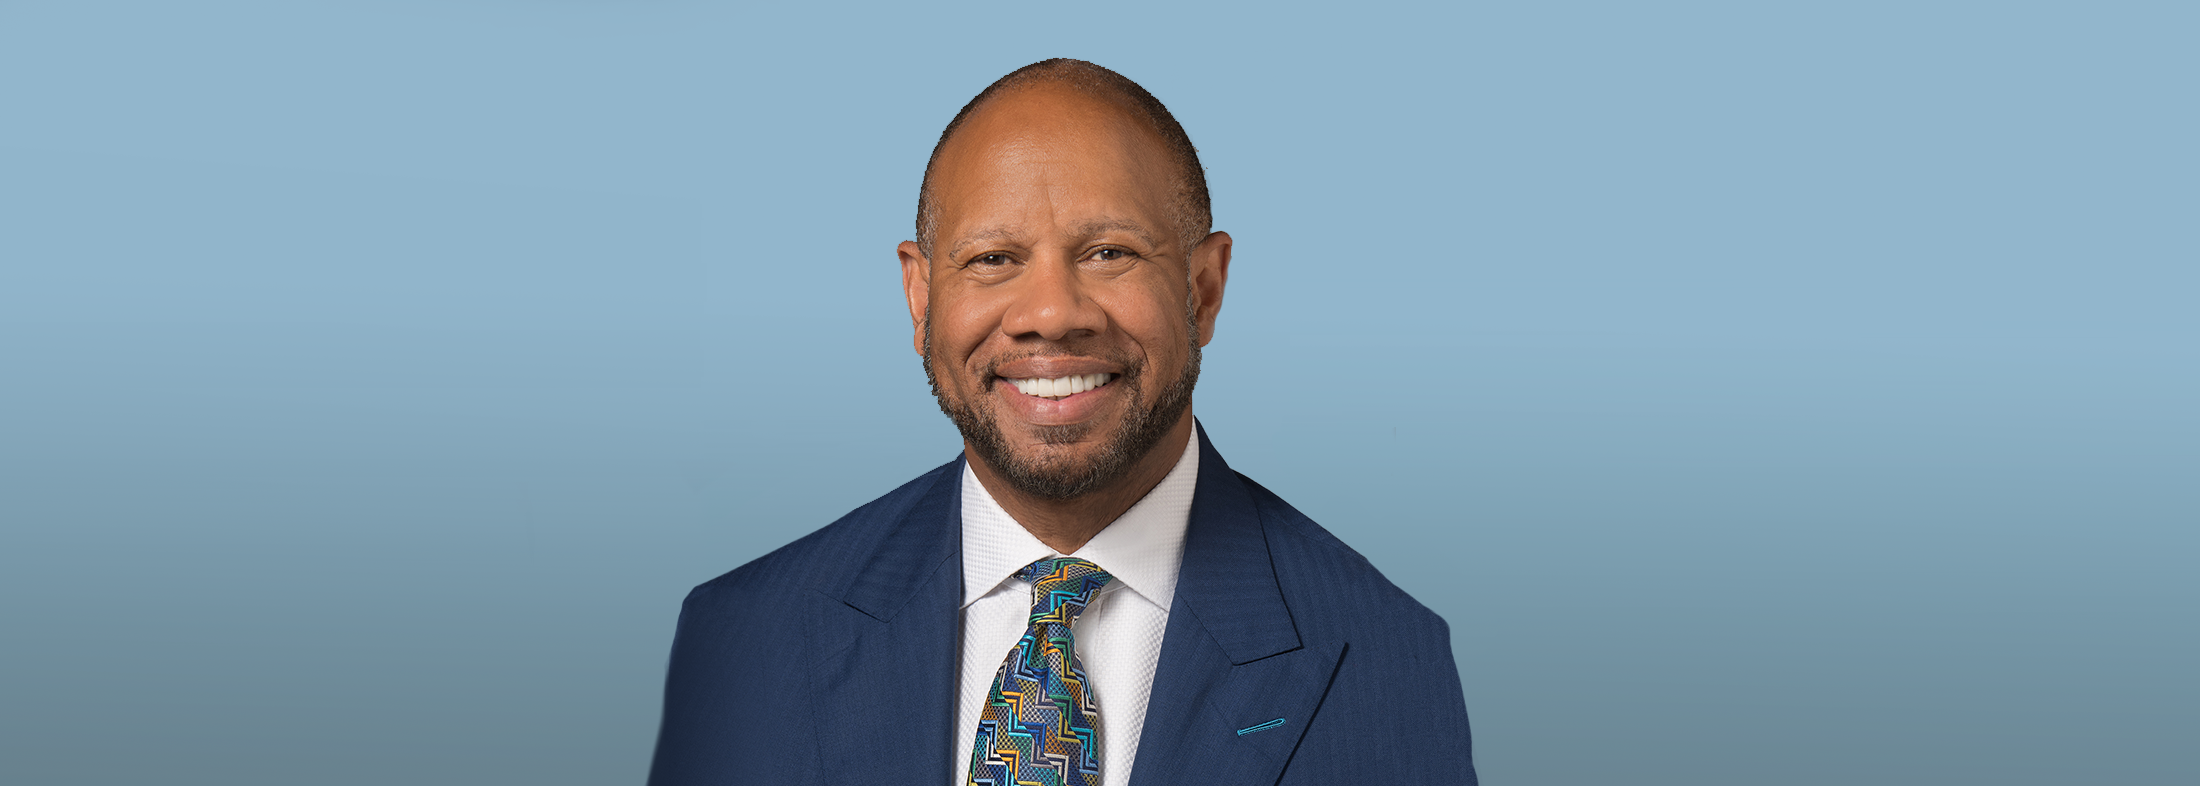 Congratulations to CommonSpirit CEO Wright Lassiter III for being named among Modern Healthcare’s 100 Most Influential People in Healthcare for 2022.